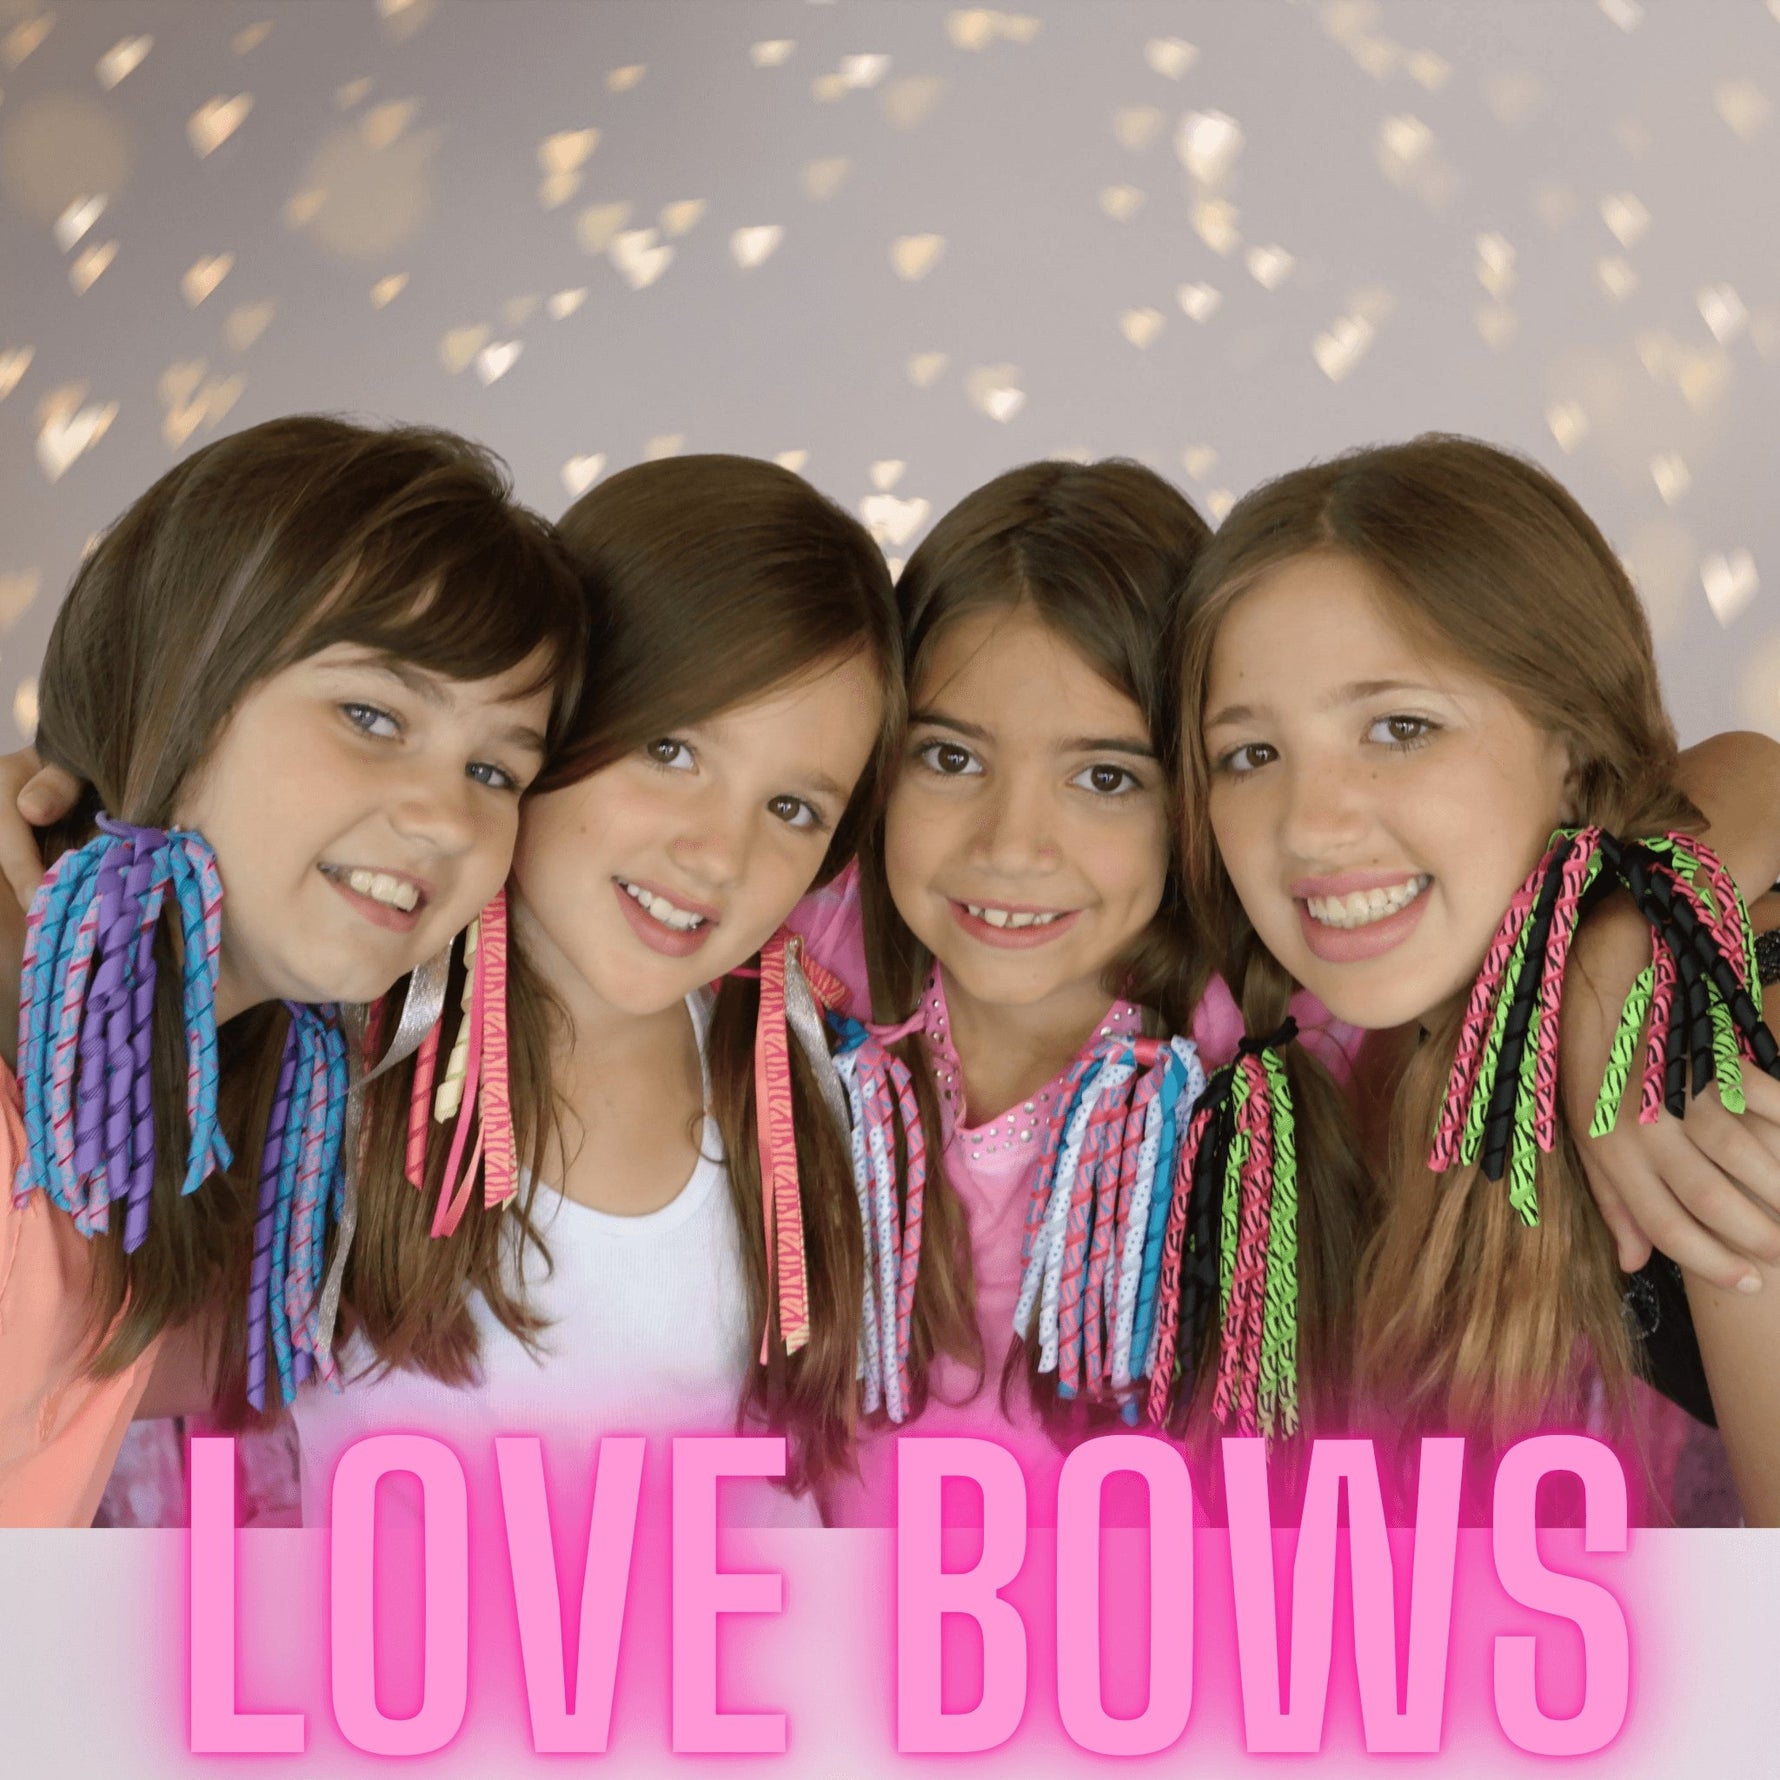 Calling all girls who love Hair Bows - Chicky Chicky Bling Bling, LLC